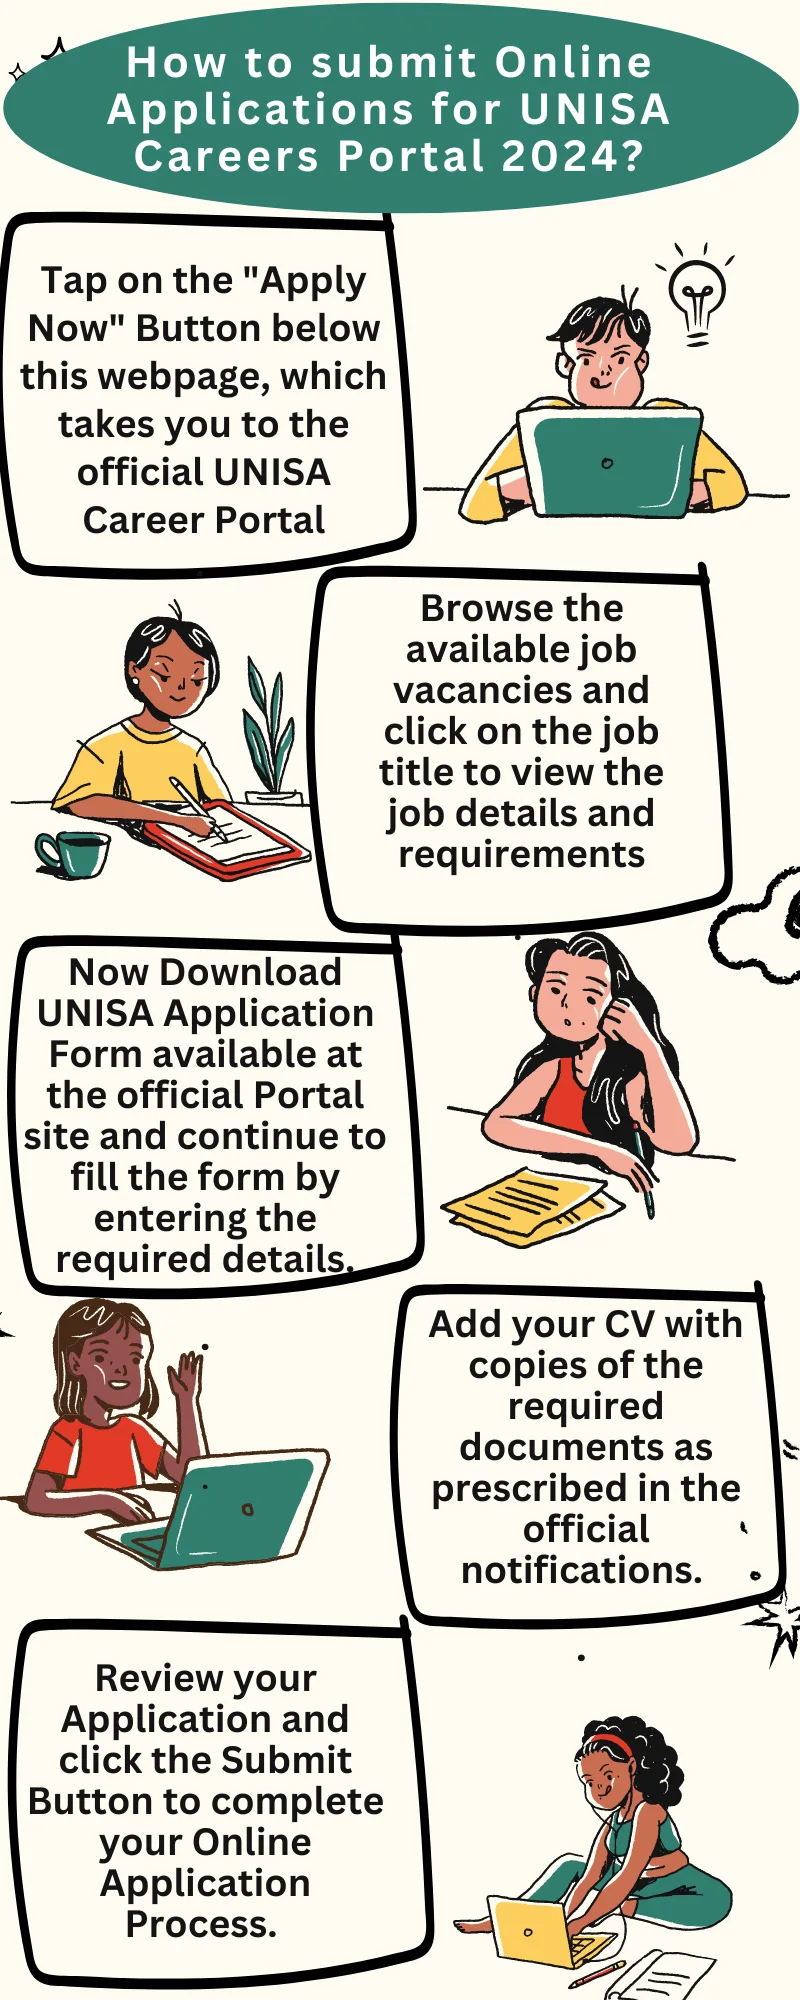 How to submit Online Applications for UNISA Careers Portal 2024